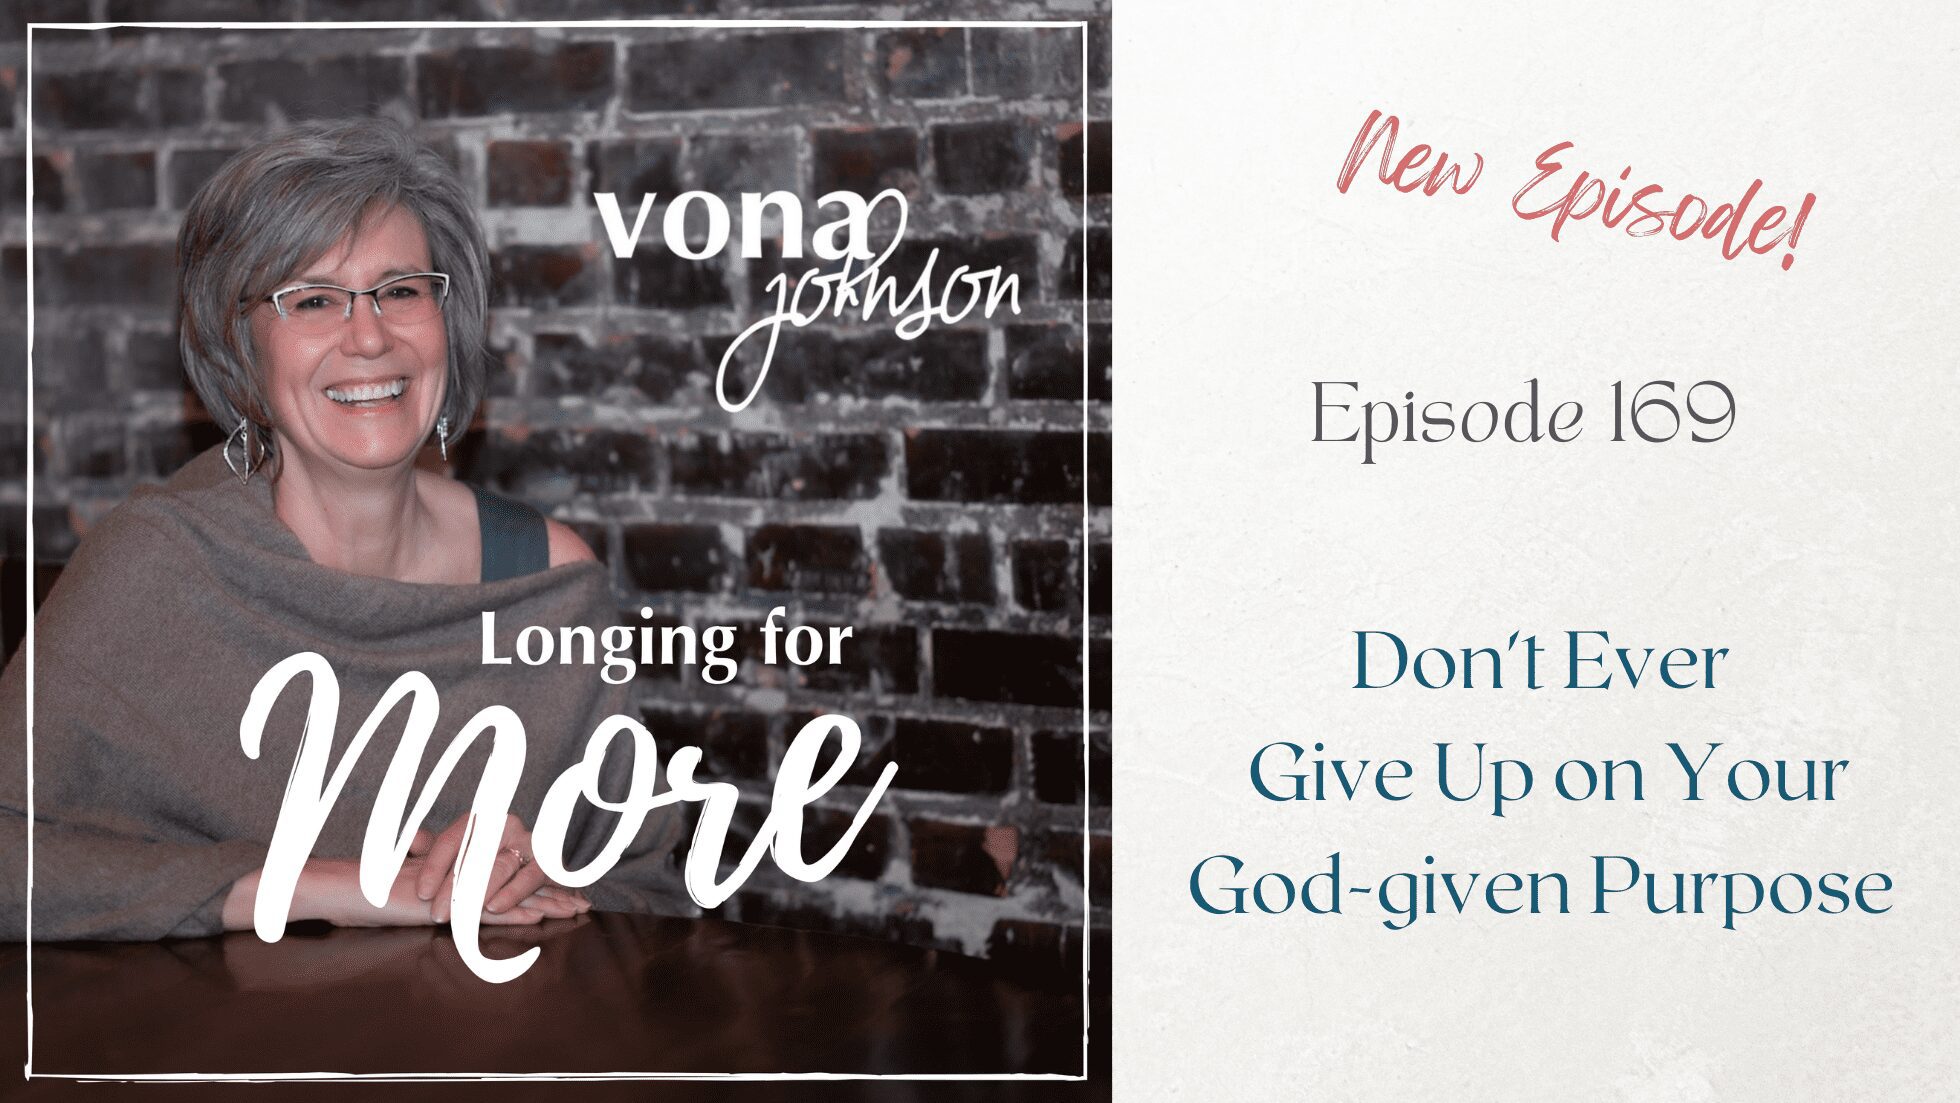 Banner for episode 169 Don't Ever Give Up on Your God-given Purpose